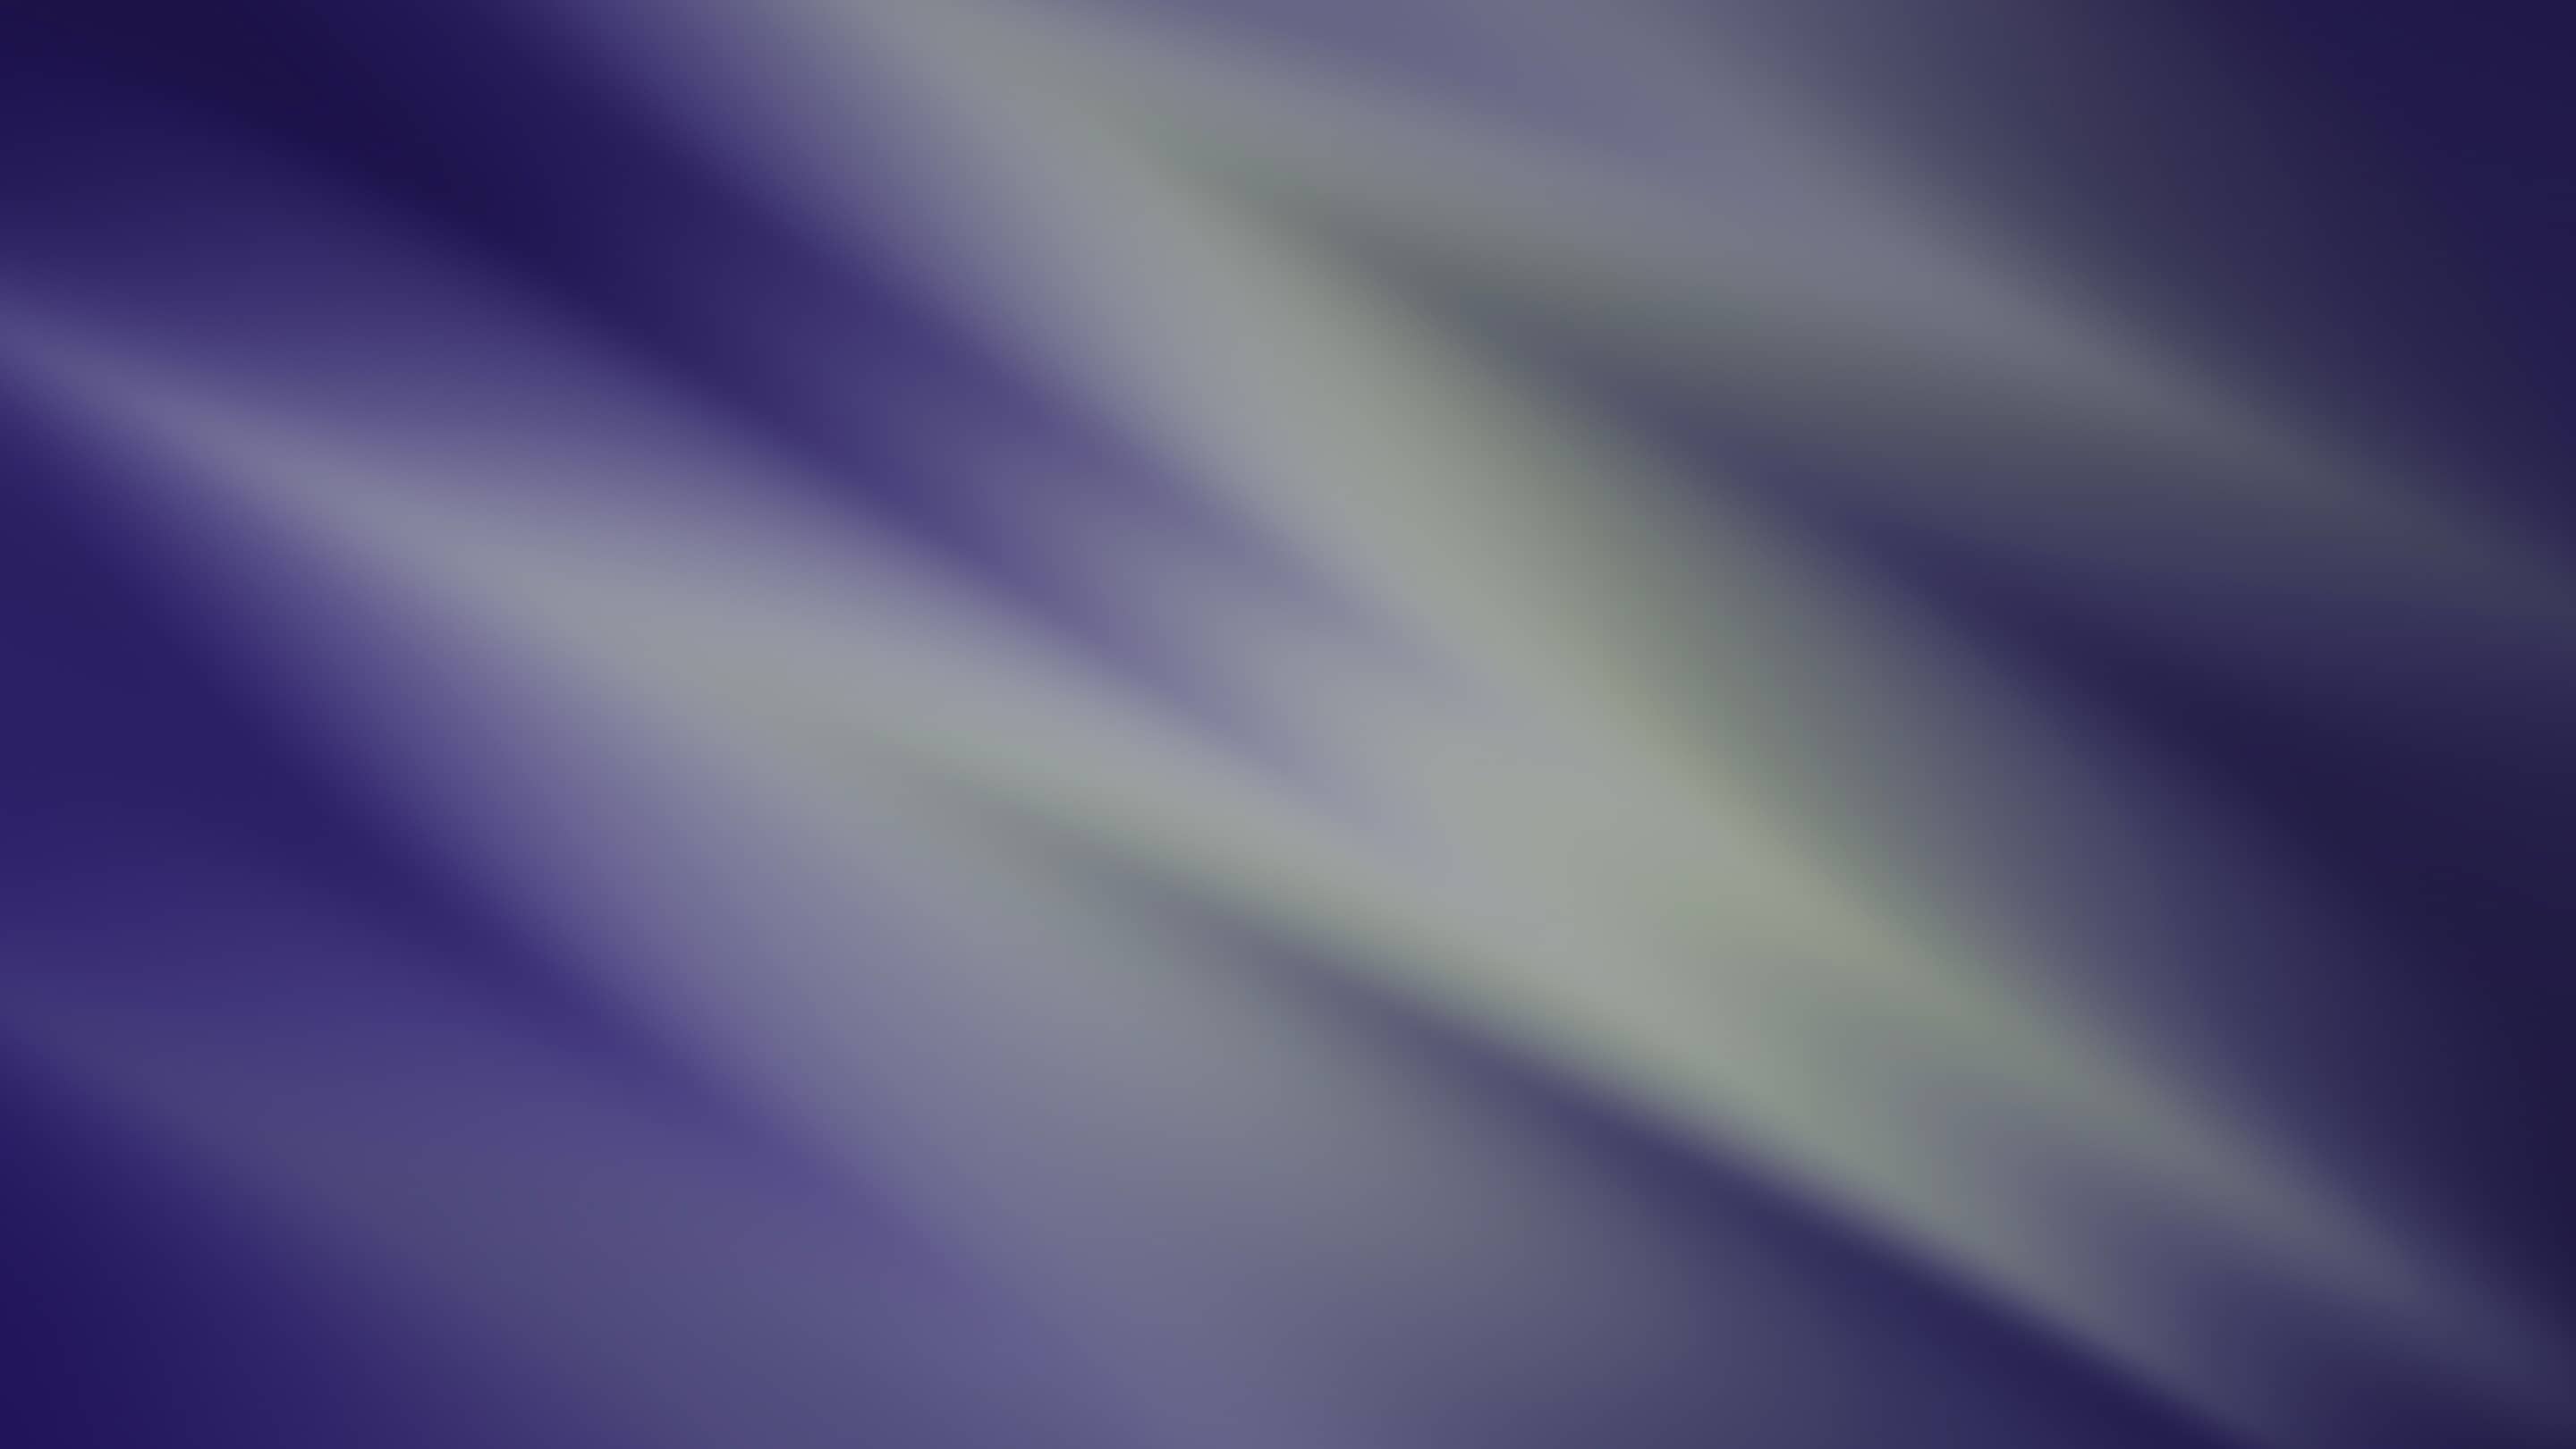 A purple and green blurred background.